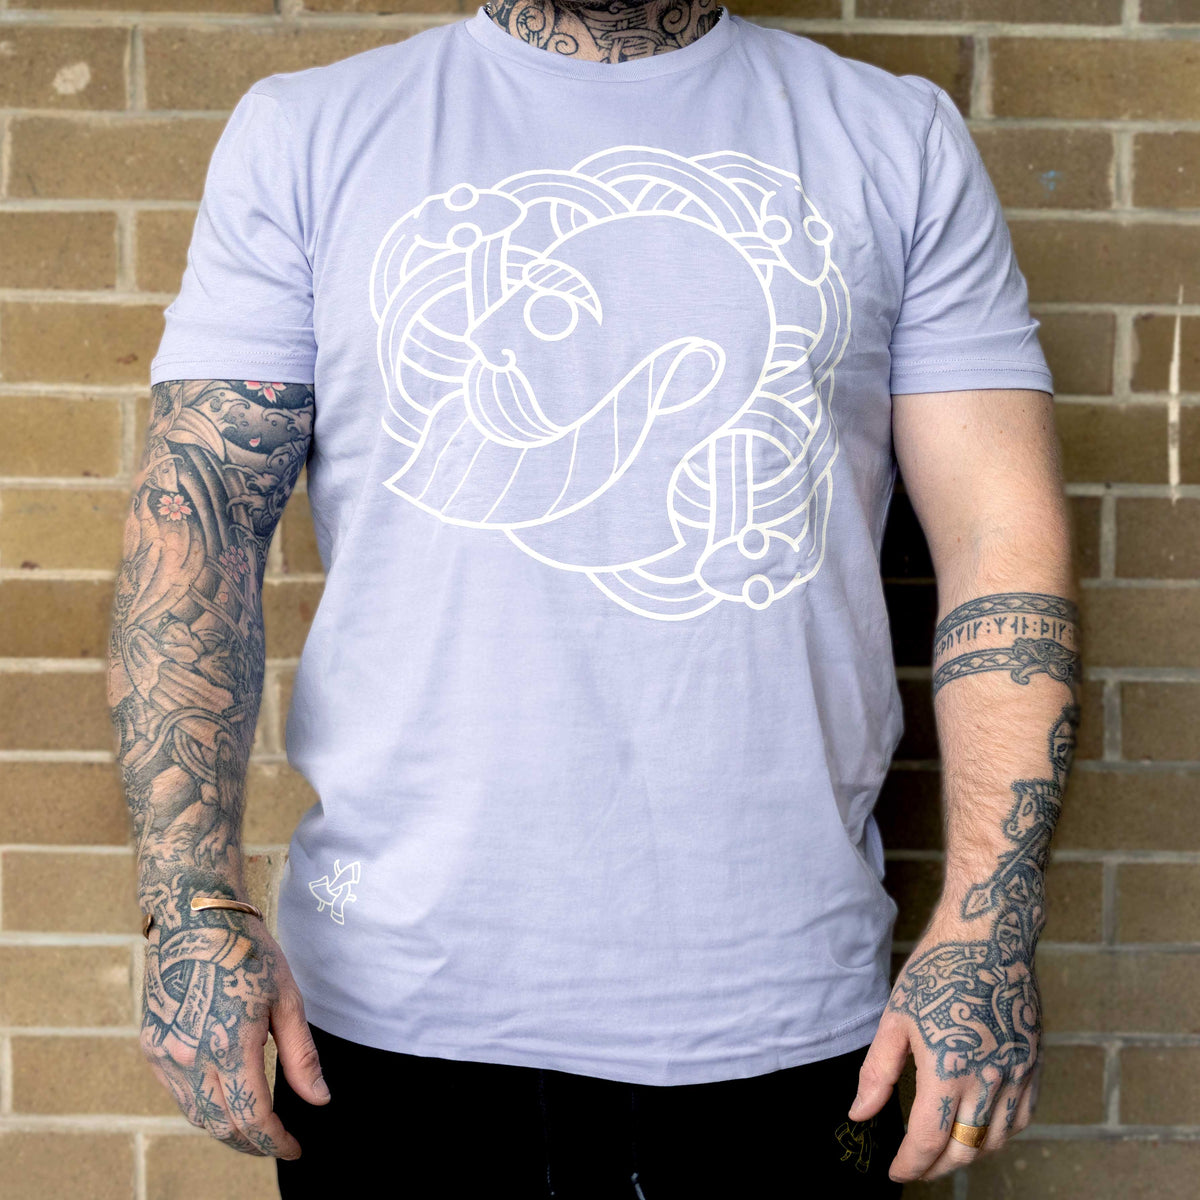 Ragnar and The Snakepit Tee(Lavender with White Print)